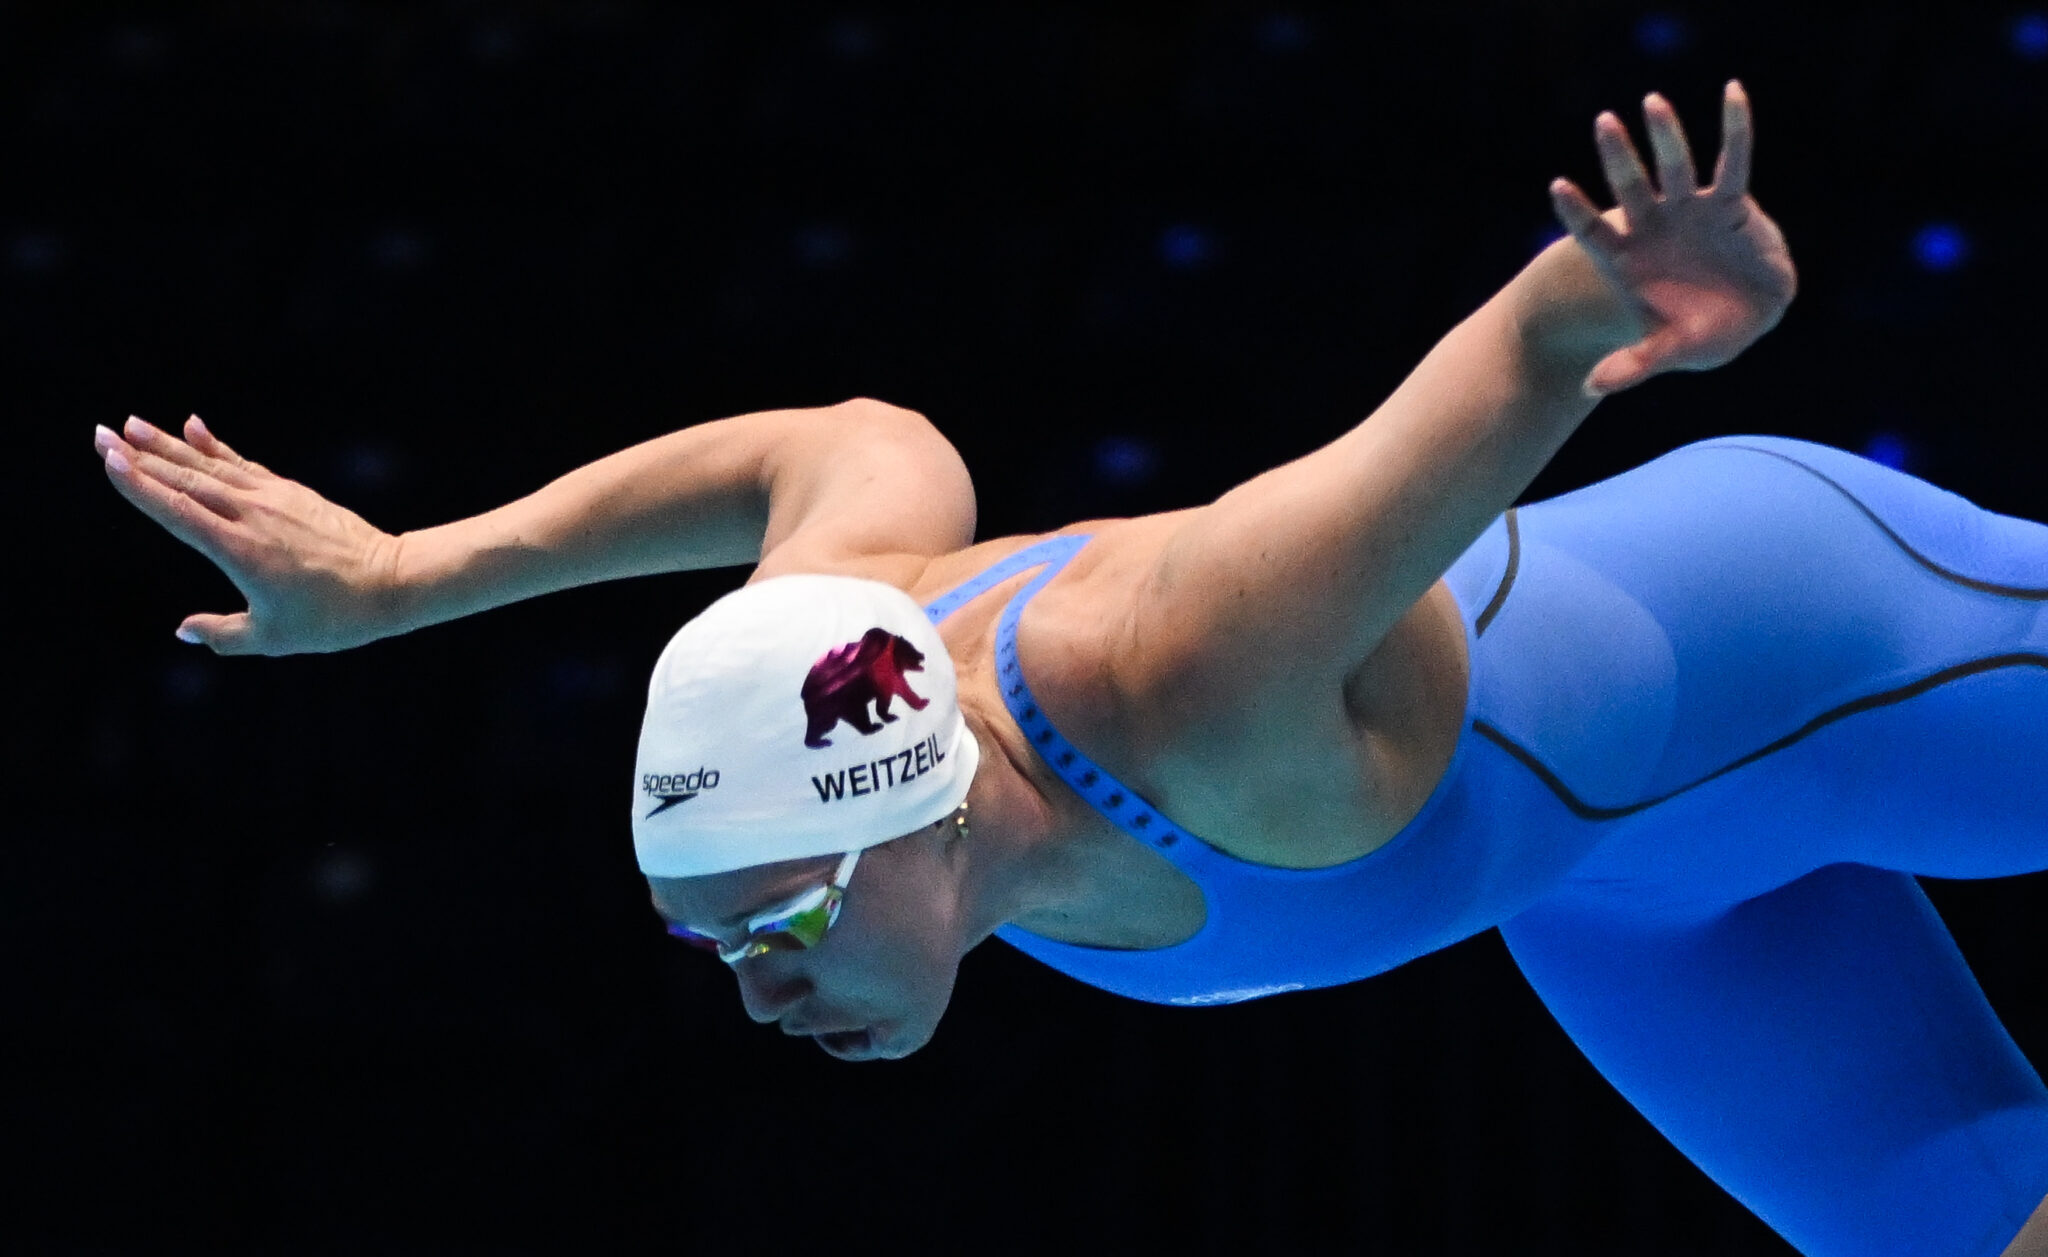 Swimmer Abbey Weitzeil, wearing a white swim cap and blue swimsuit, dives into the water with arms outstretched.